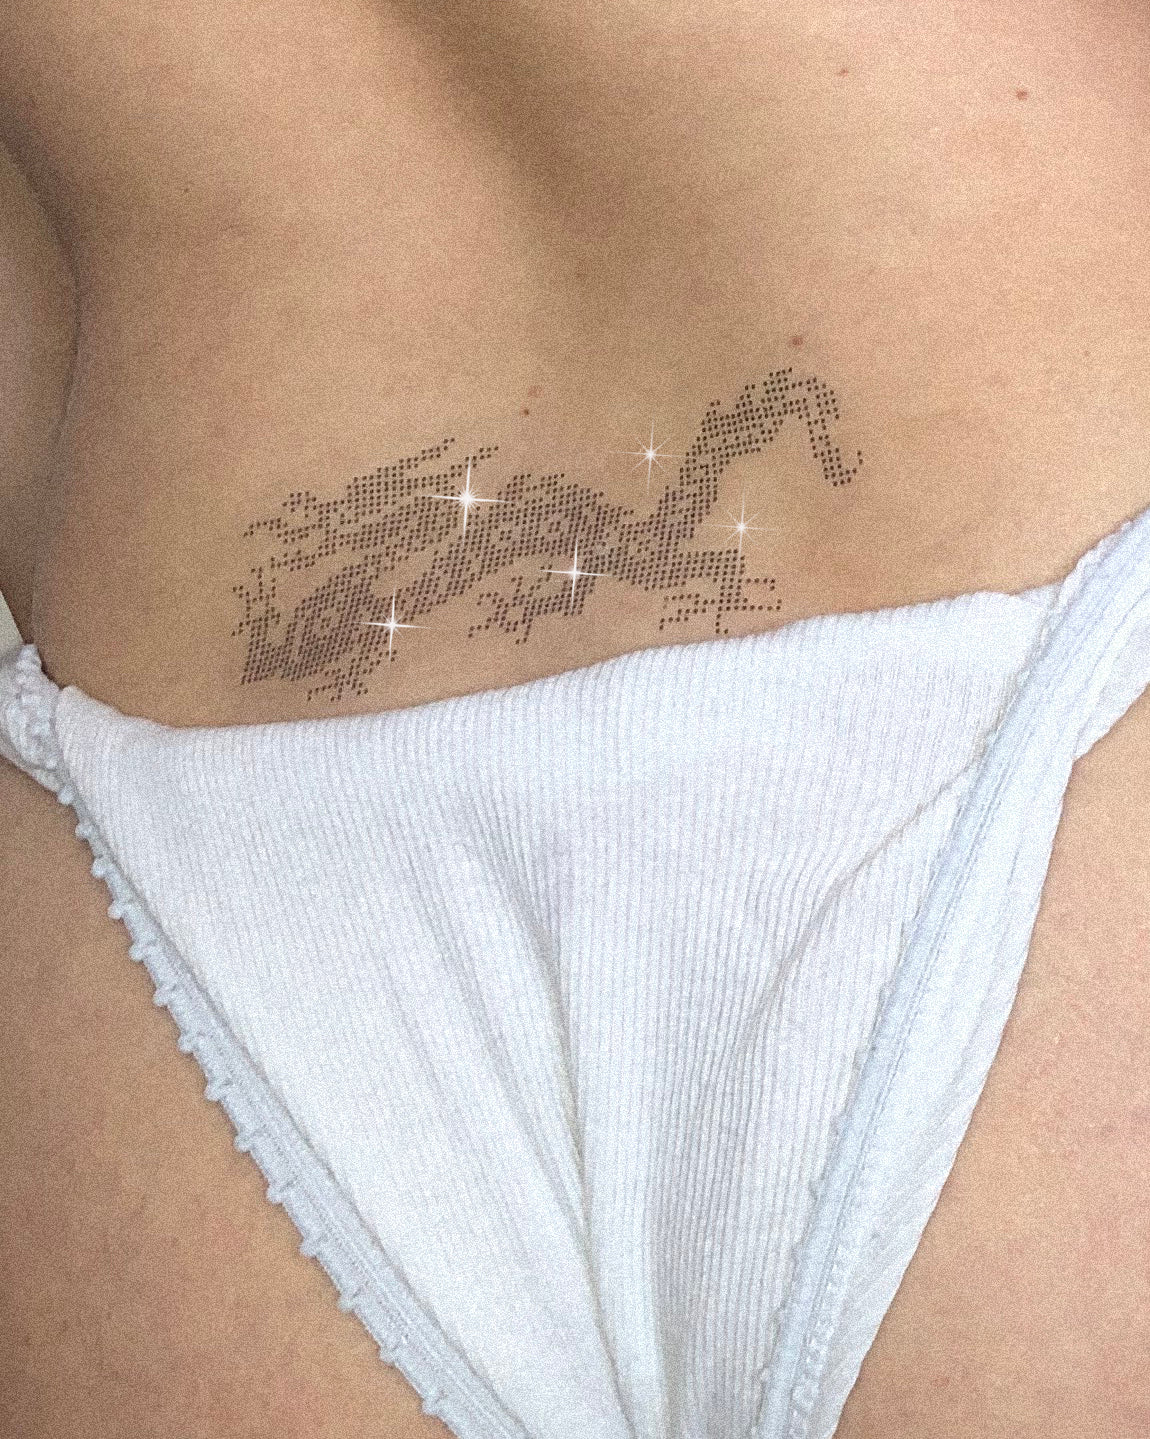 temporary tattoos - Come to Sister